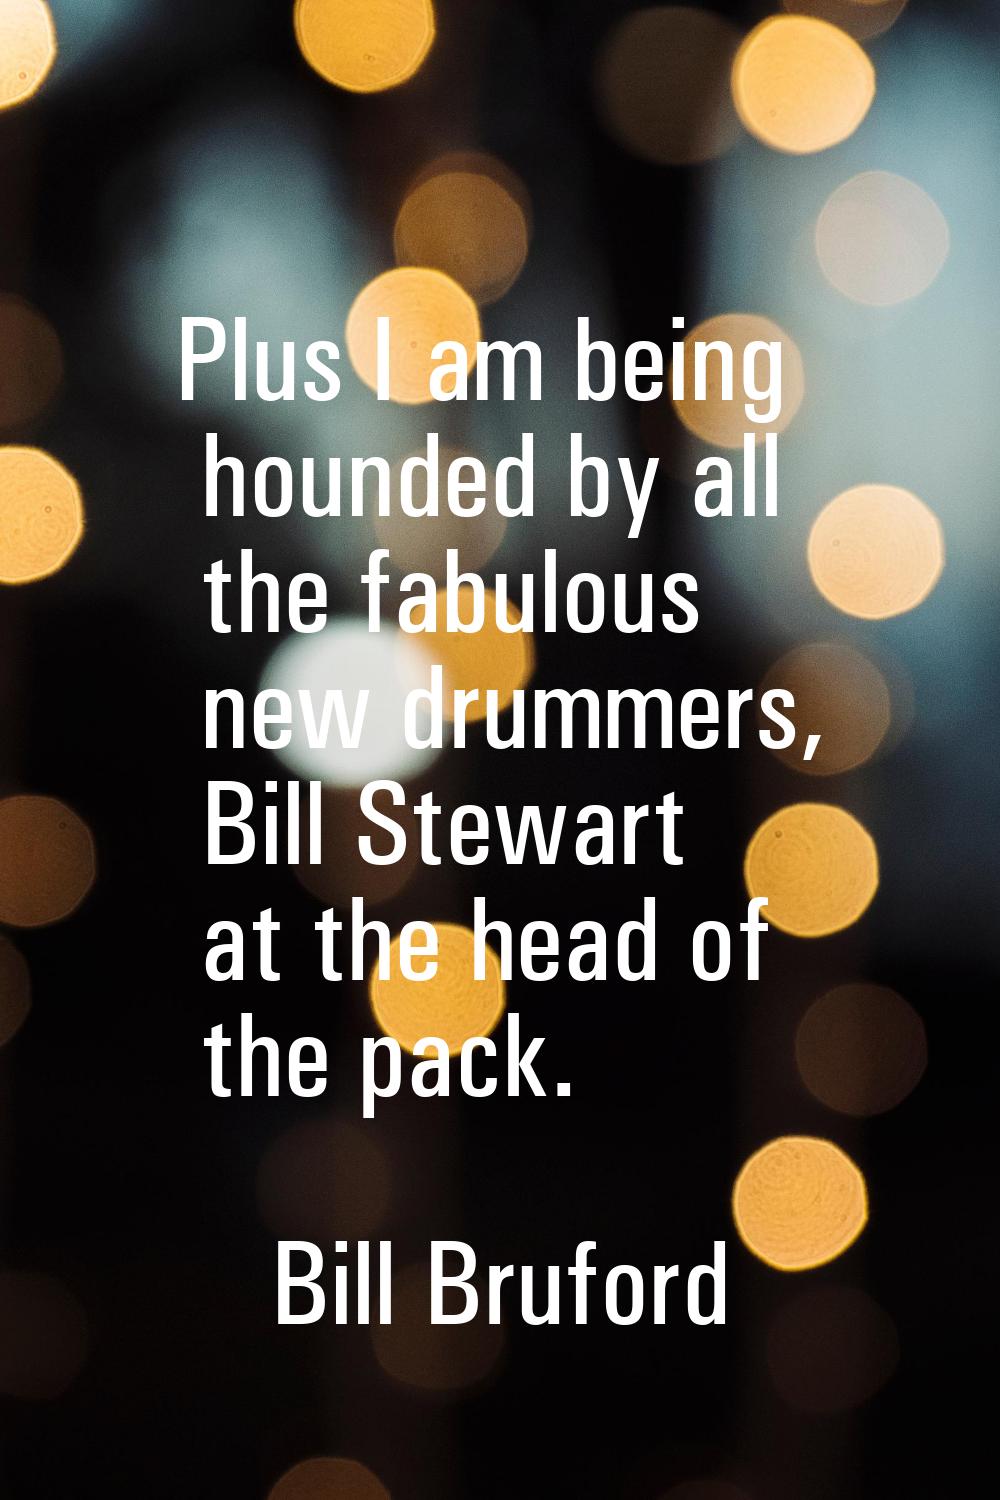 Plus I am being hounded by all the fabulous new drummers, Bill Stewart at the head of the pack.